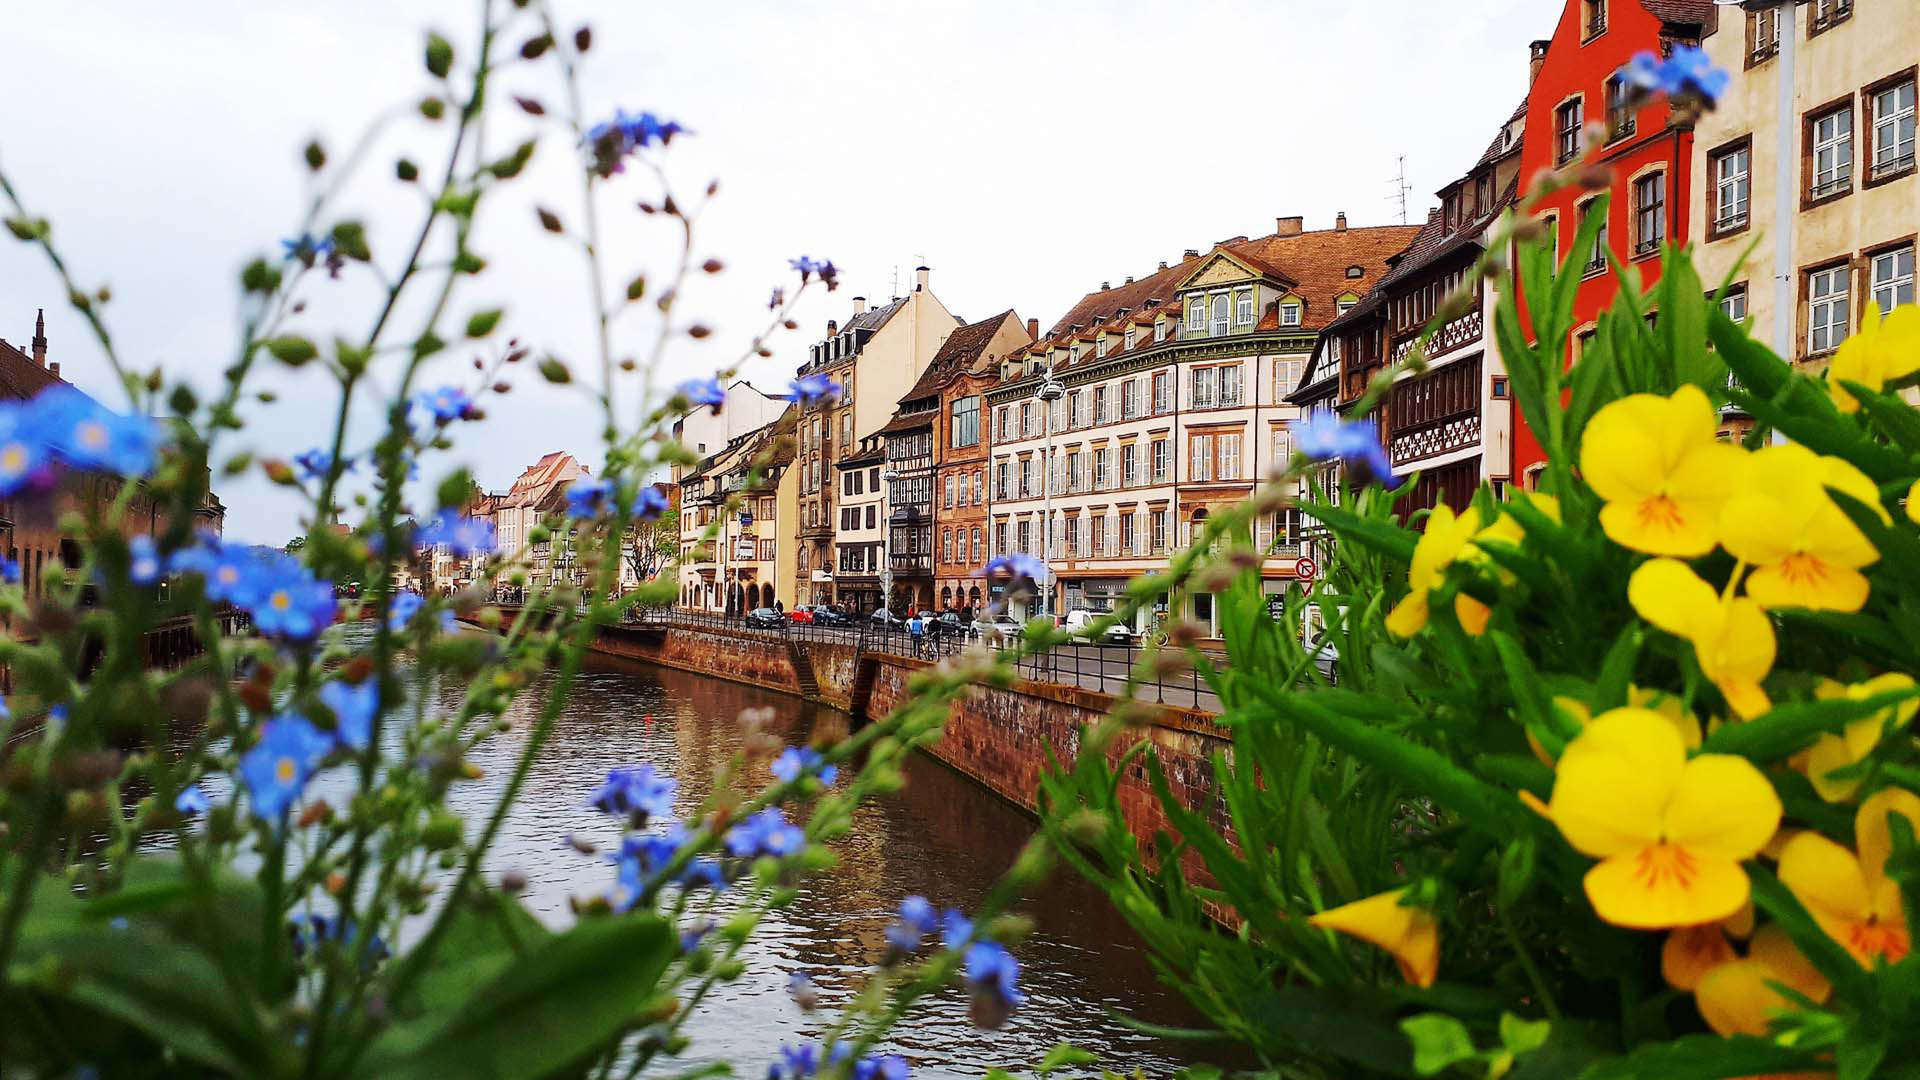 Warm up during spring with lovely floral scenes in Alsace